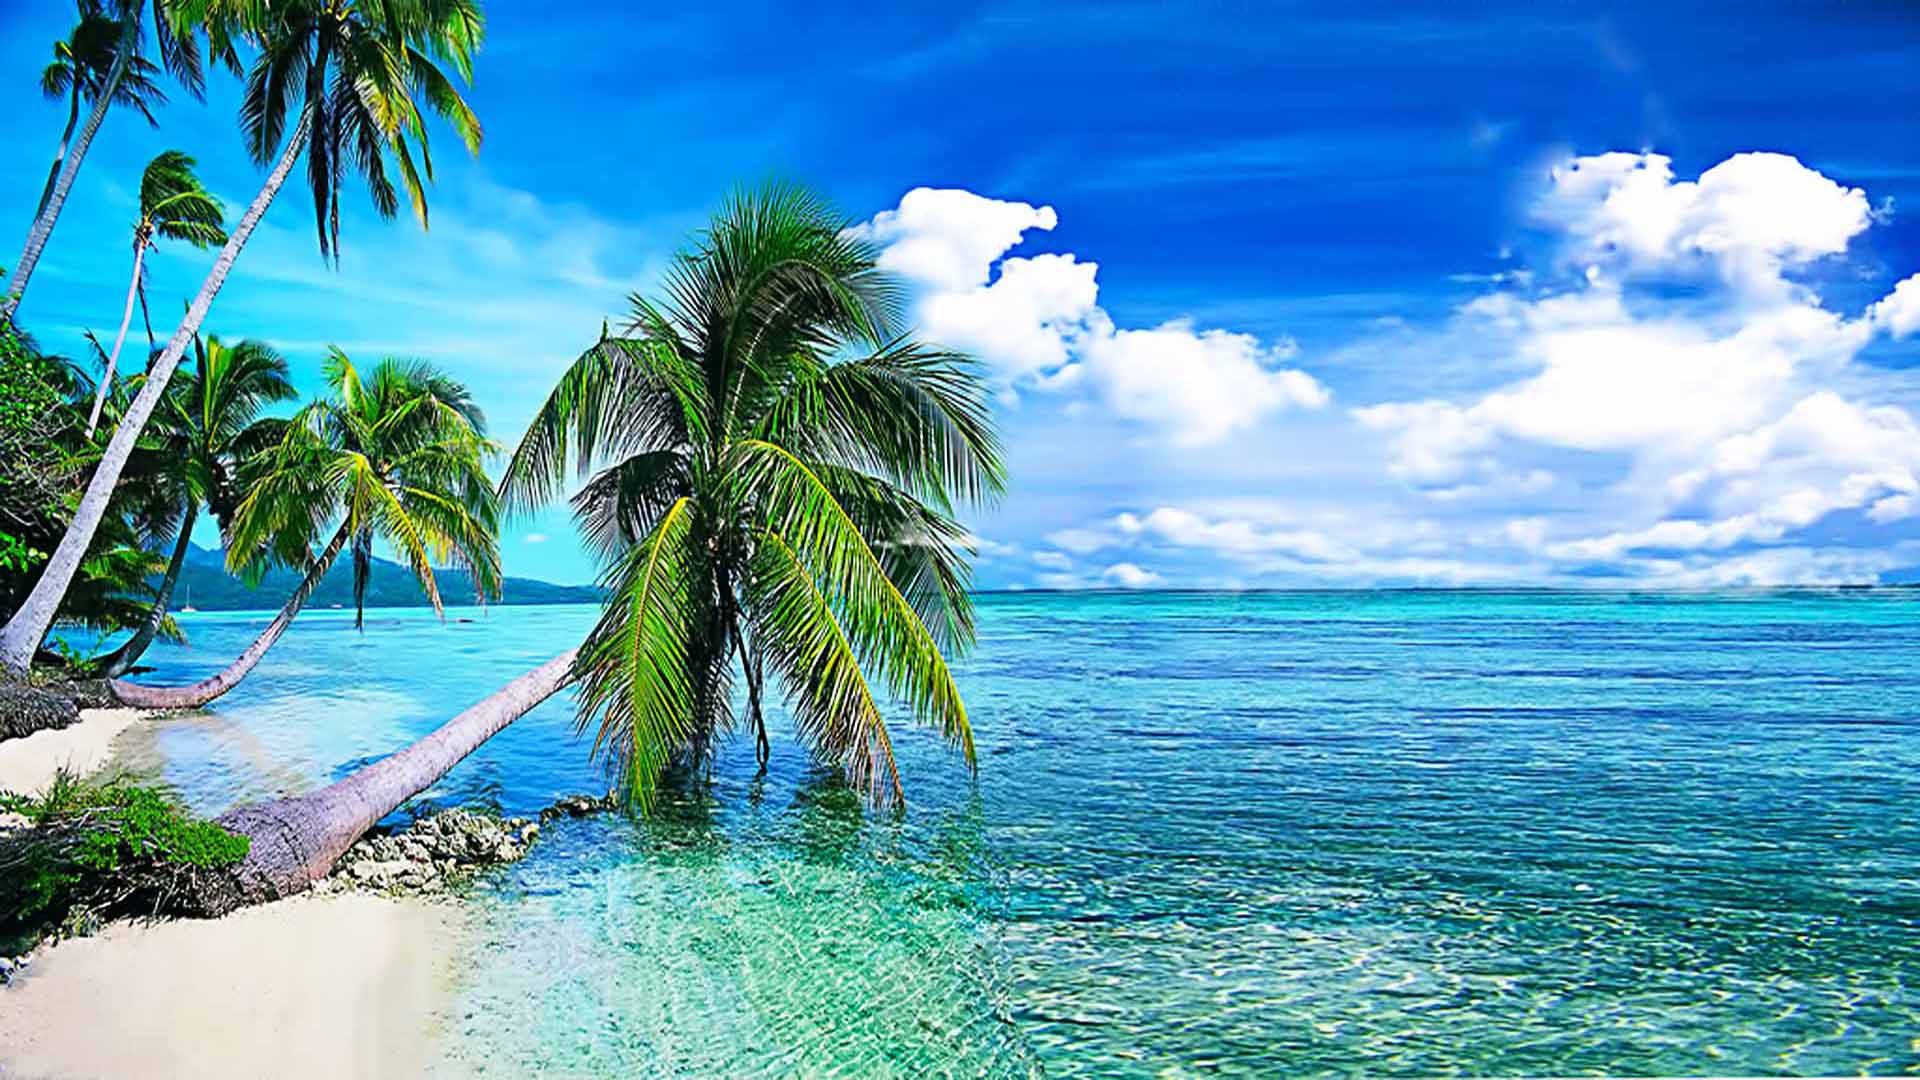 Summer Background, Tropical Beach With  With Crystal Clear Water  And White Clouds In The Sky Desktop Wallpaper Download Free 1920x1200 :  